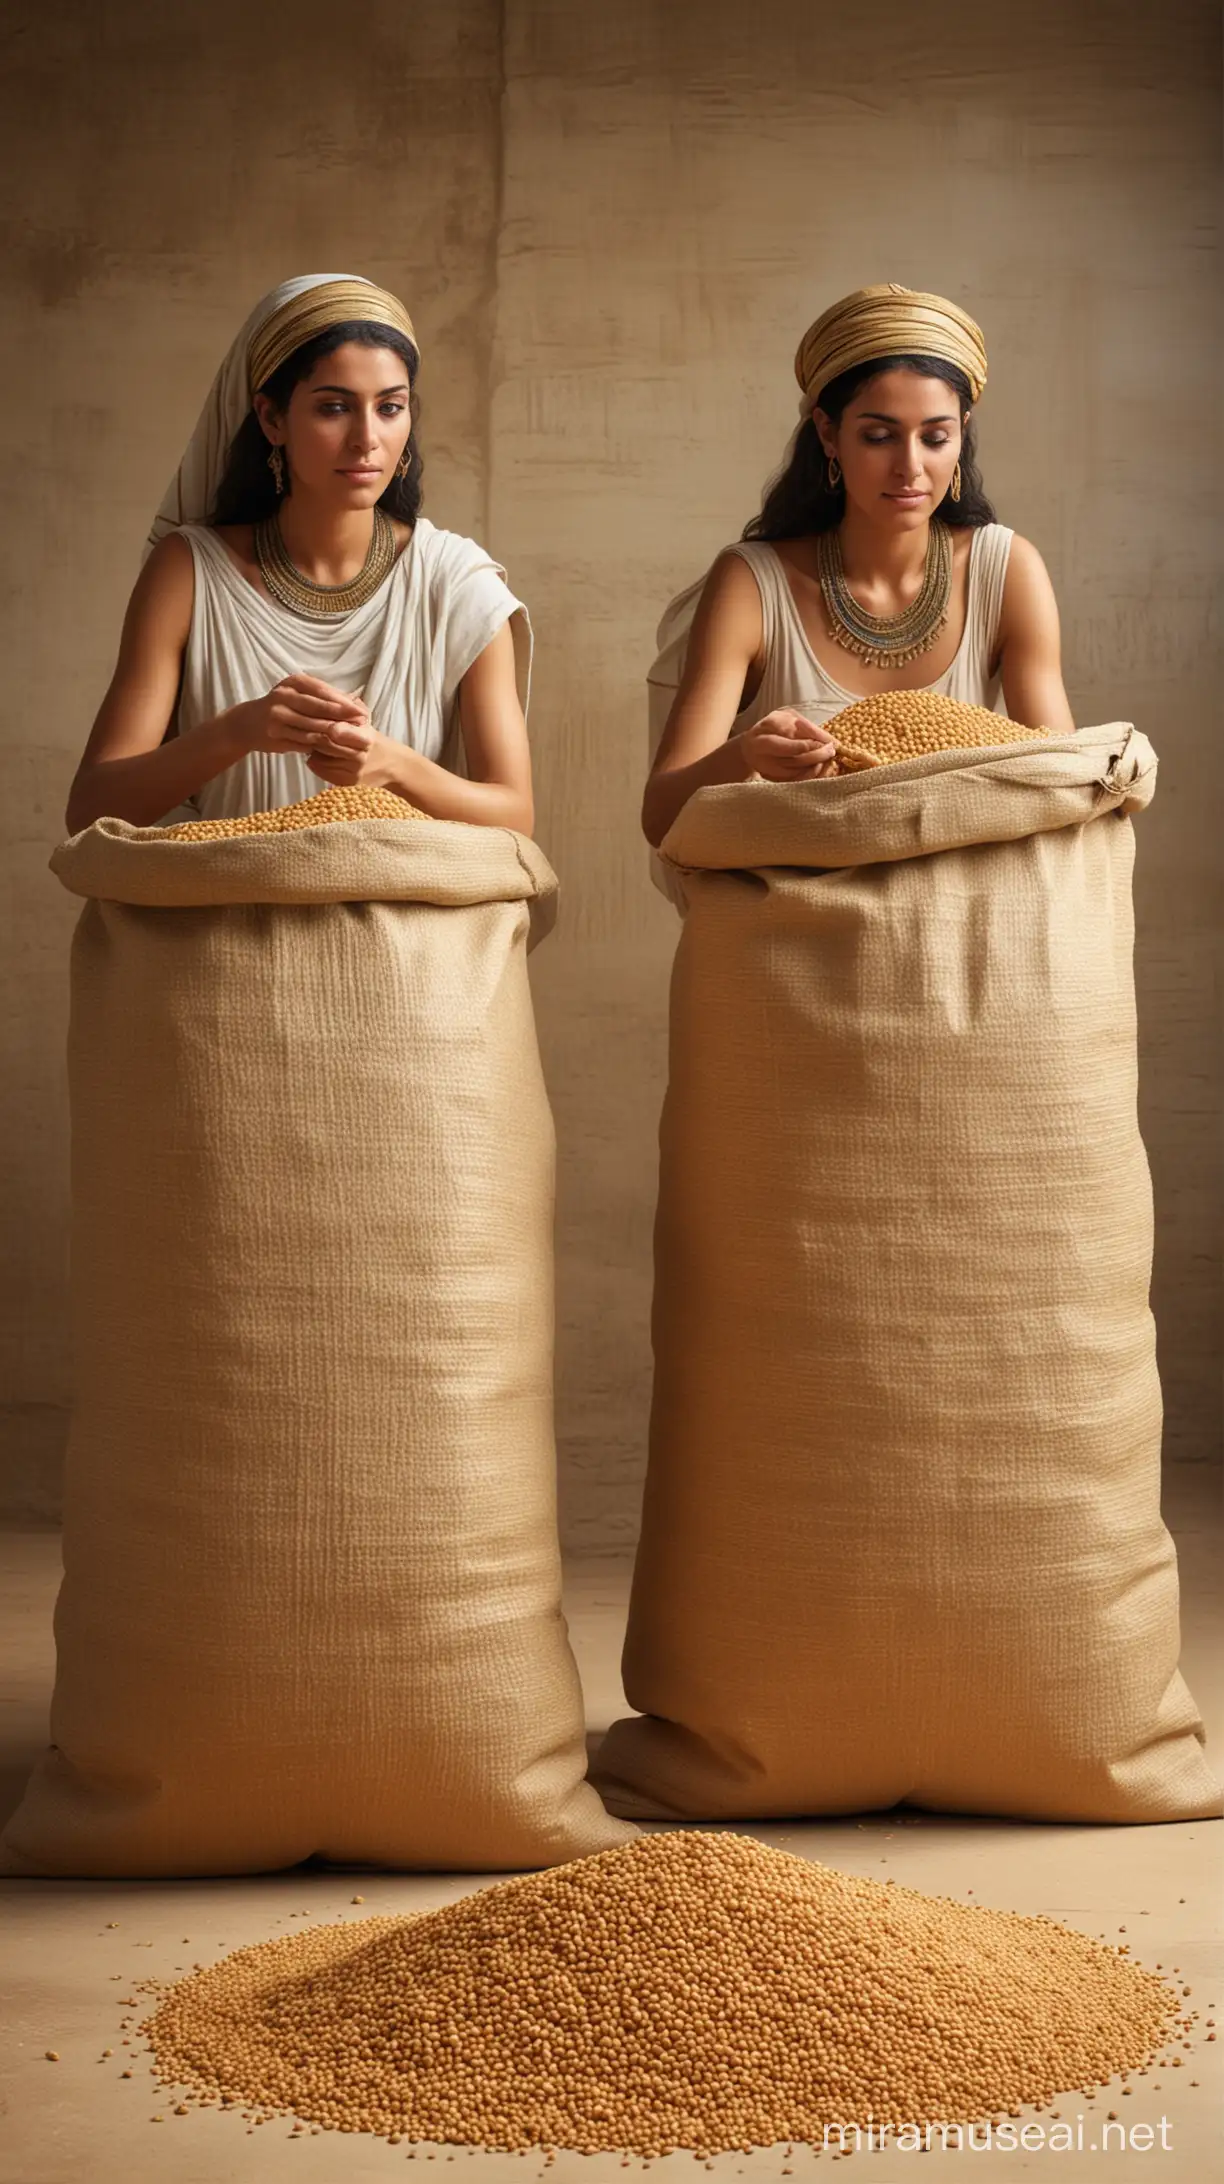 Ancient Egyptian woman urinating into two different bags filled with barley and wheat. hyper realistic